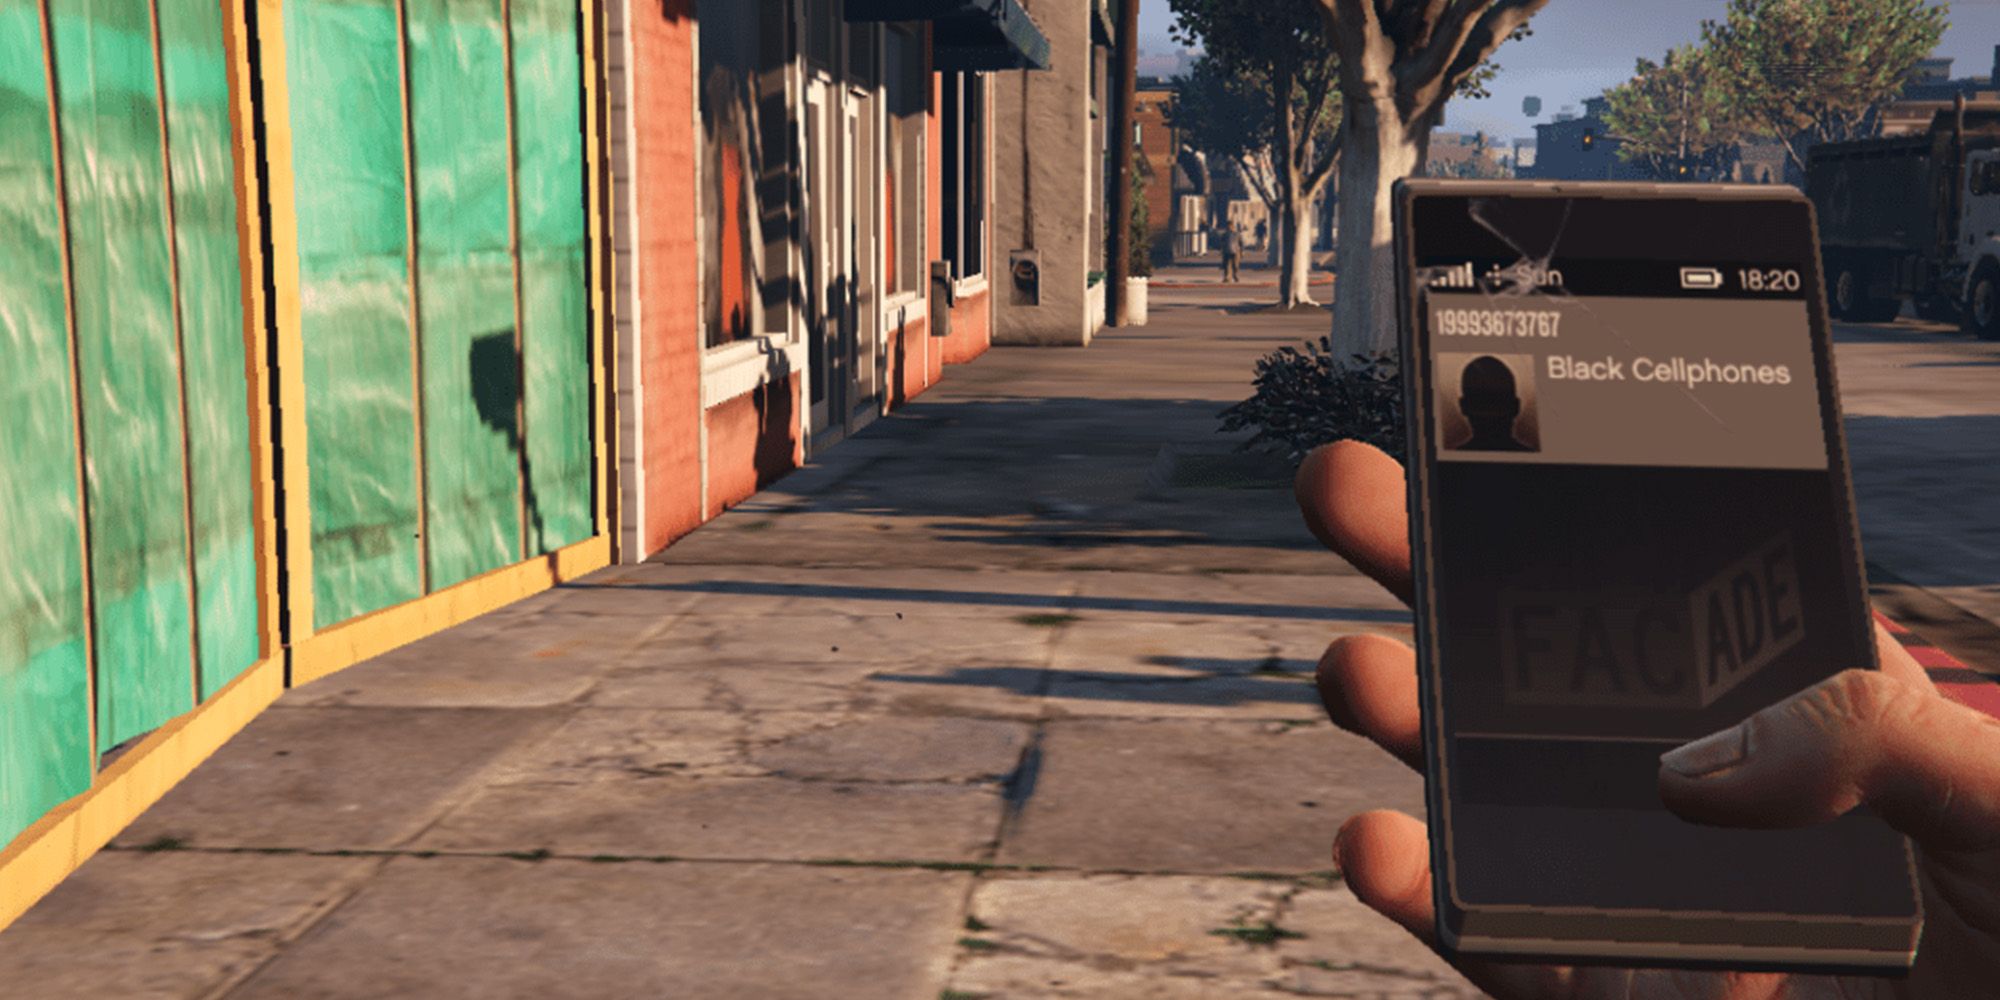 GTA 5 Activated Black Cellphone Cheat